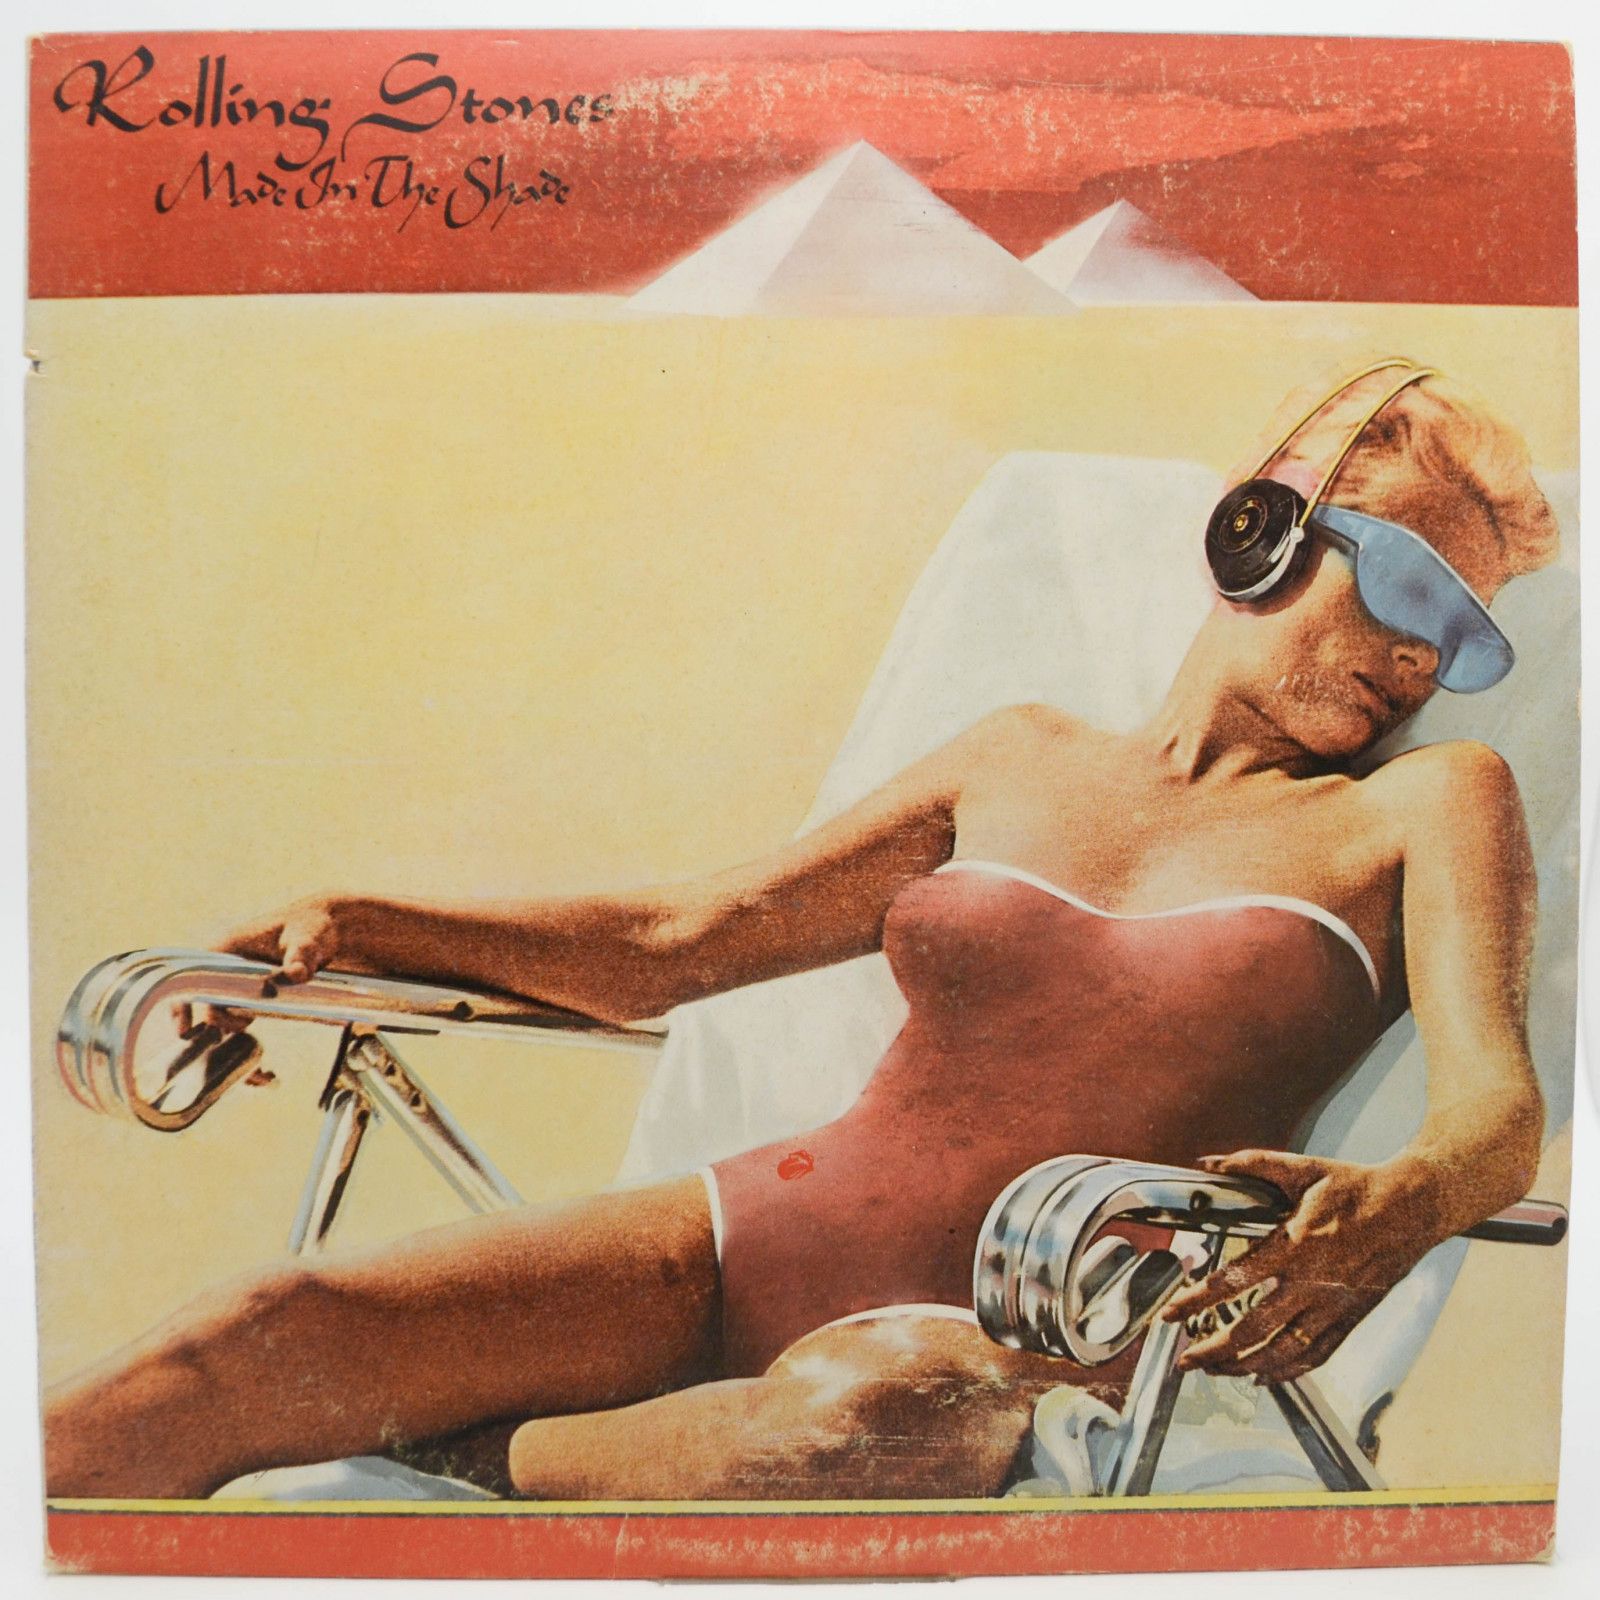 Rolling Stones — Made In The Shade (USA), 1975